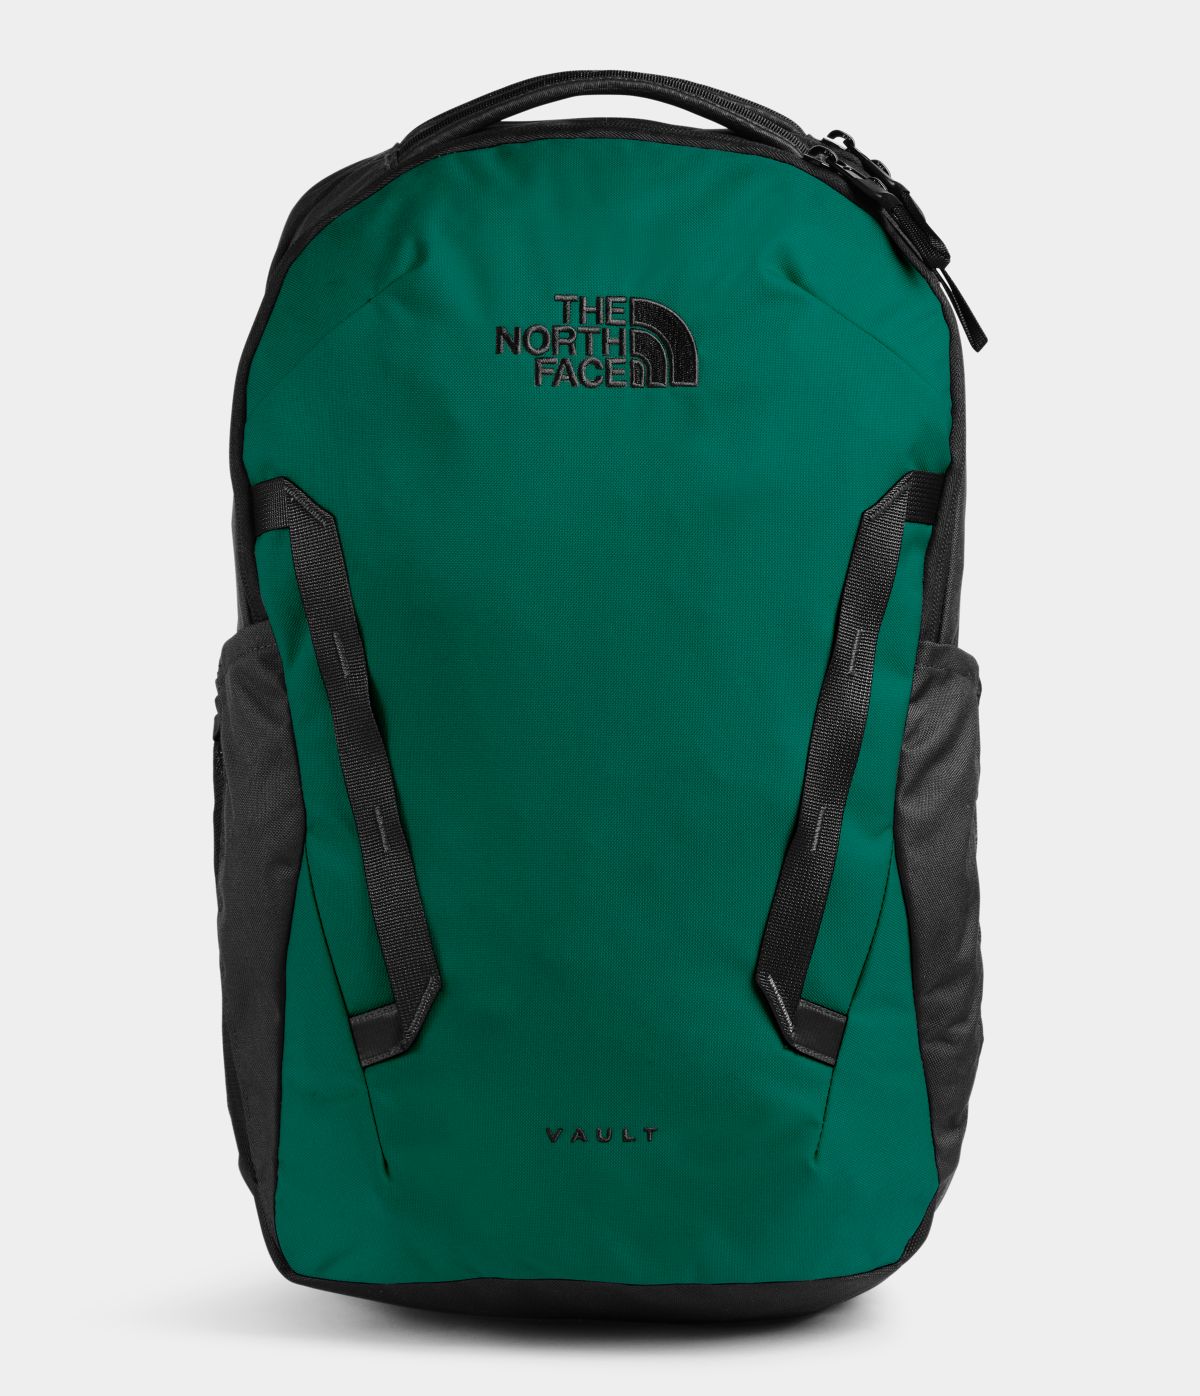 Unisex The North Face Vault Backpack in Evergreen/TNF Black from front view